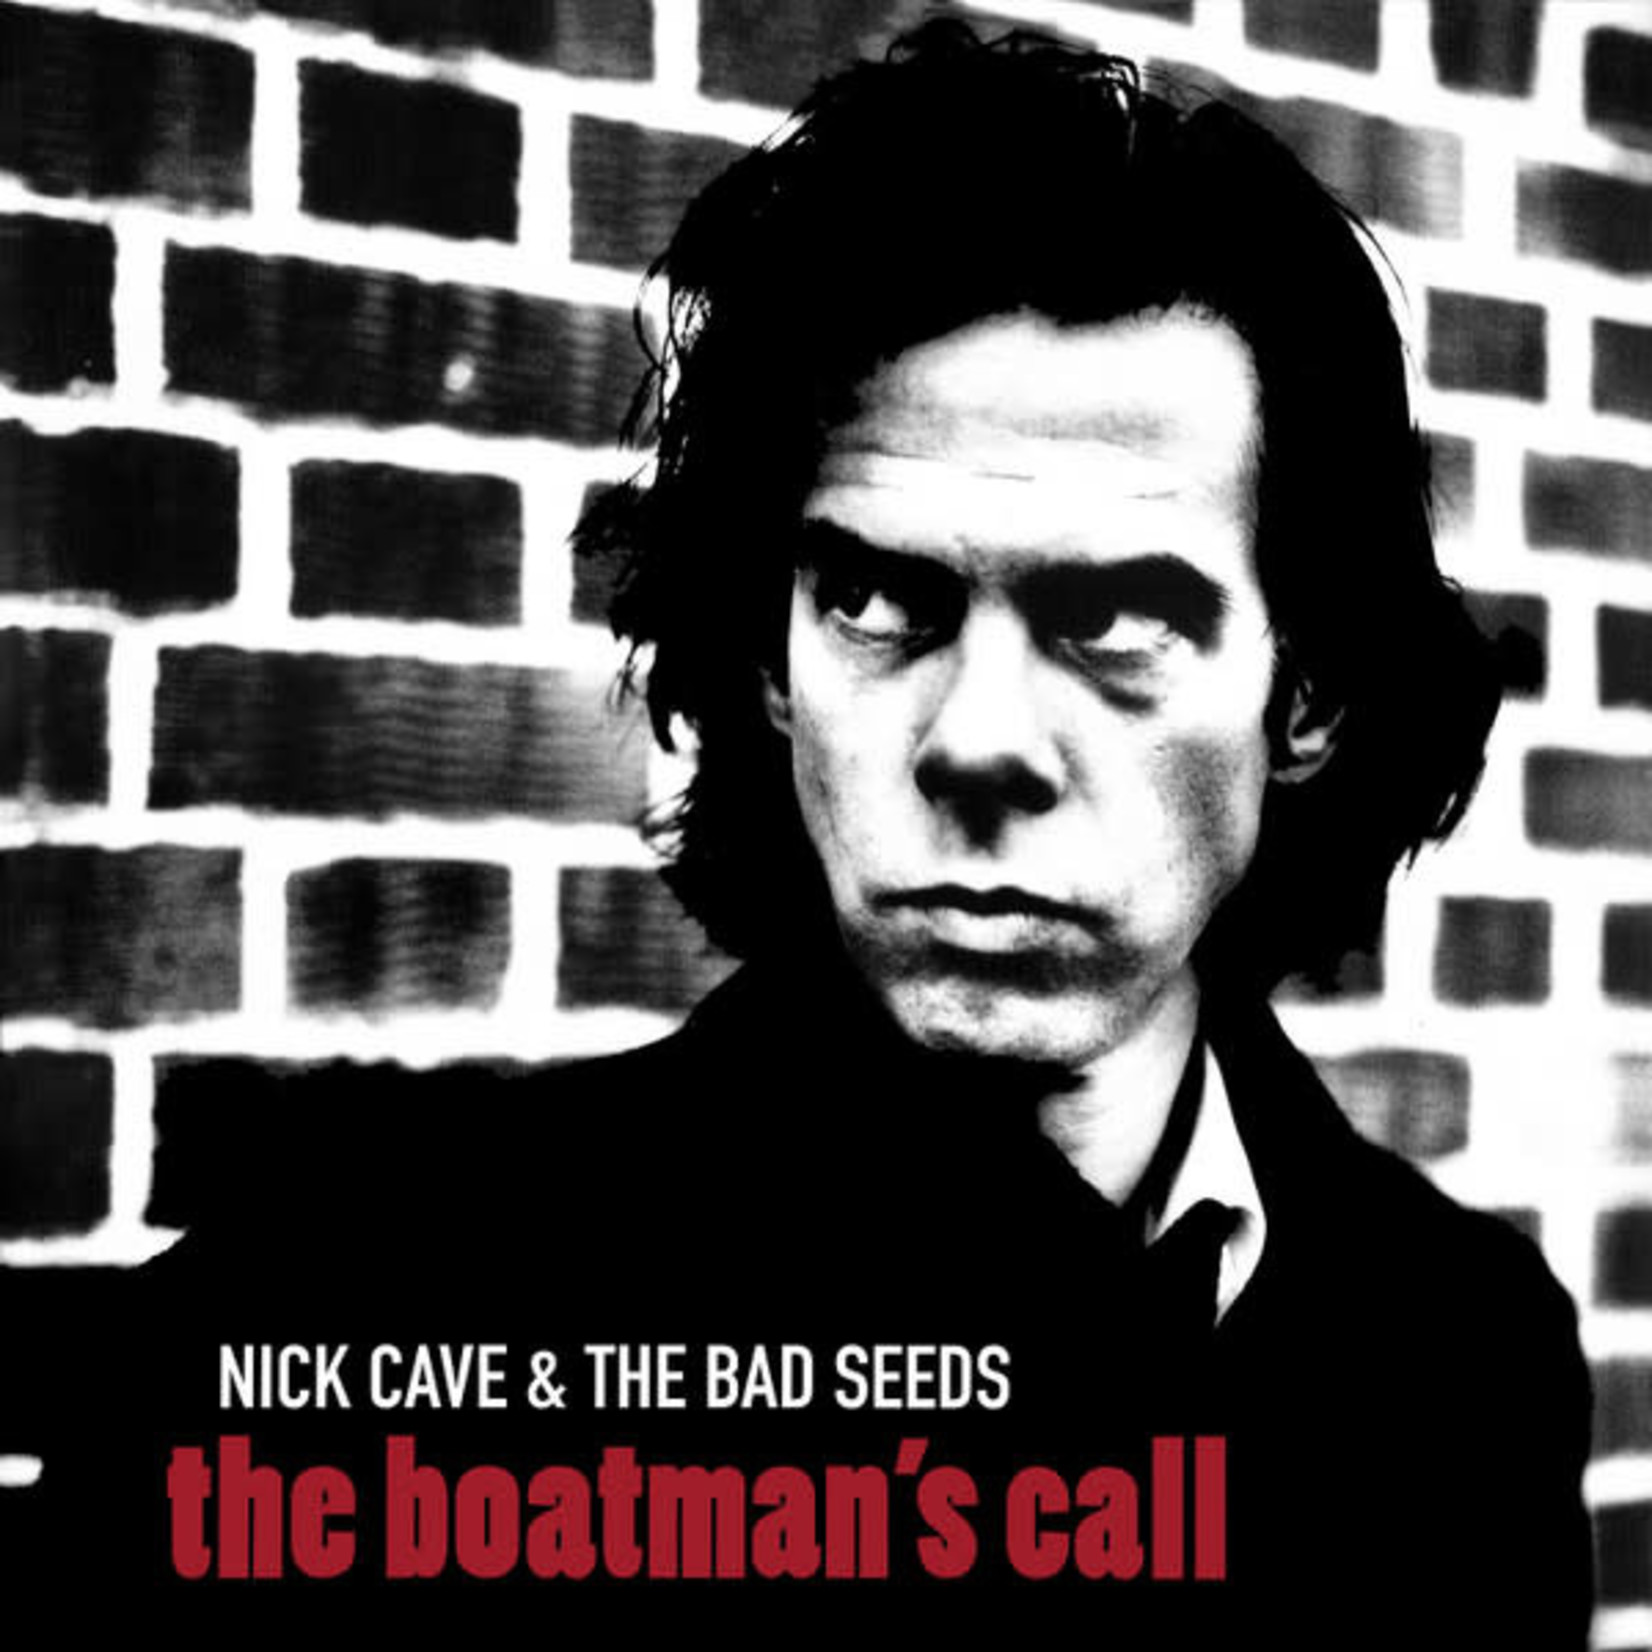 Mute Nick Cave And The Bad Seeds - The Boatman's Call (LP)